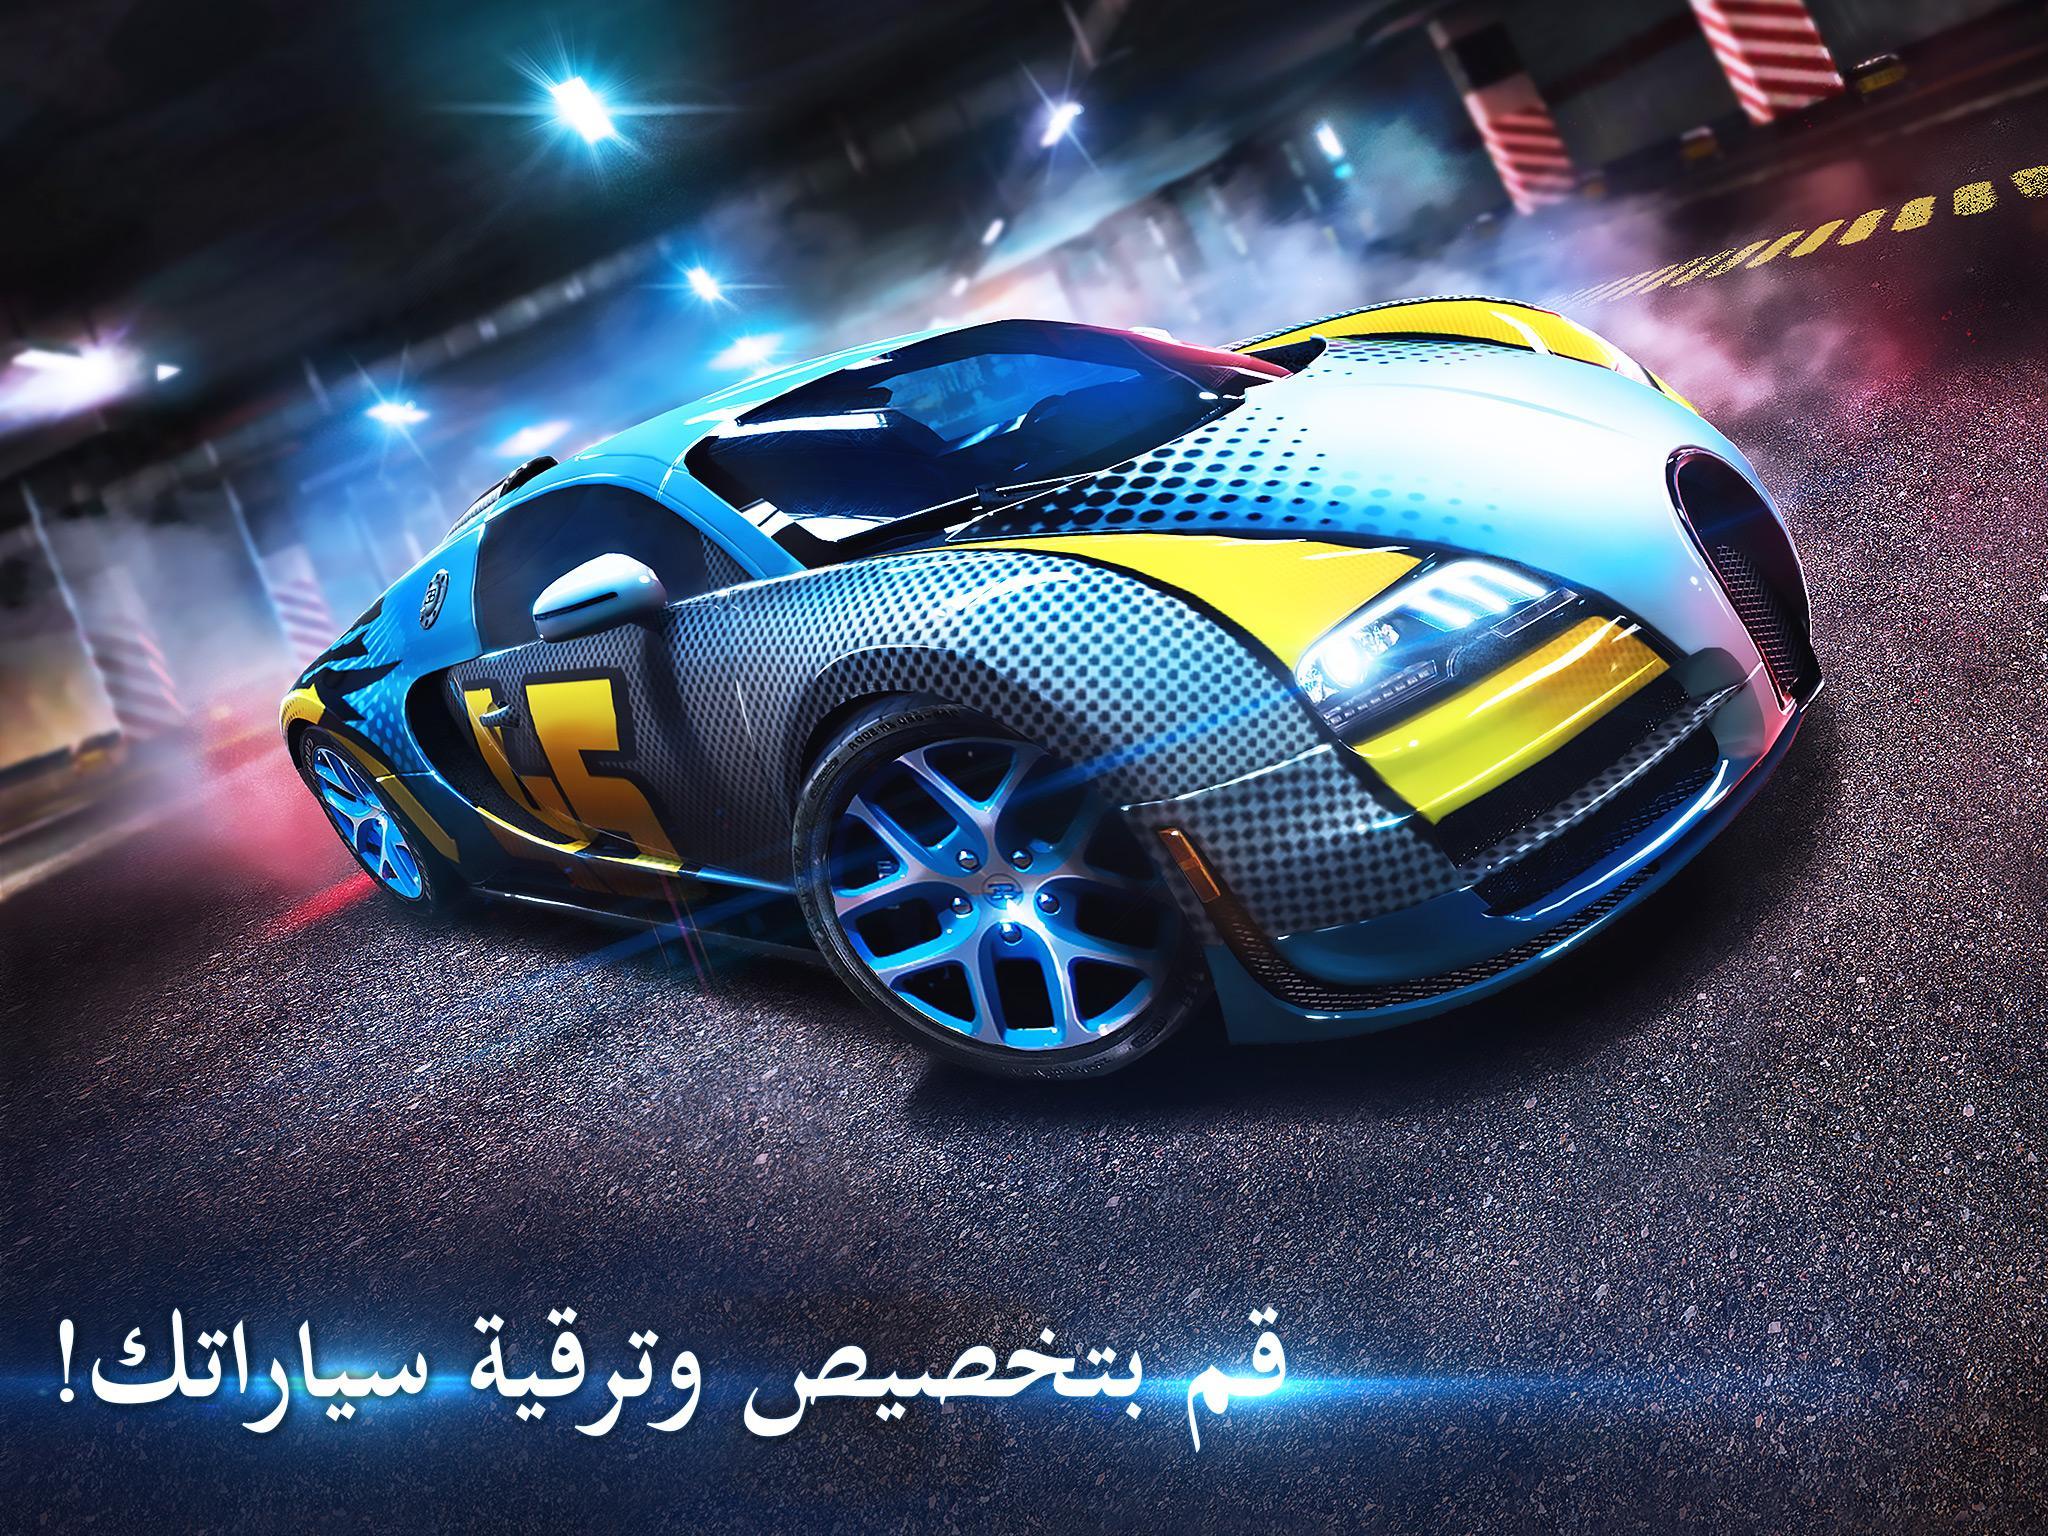 Asphalt 8 Airborne Apk Download The Best Android 3d Racing Game From Gameloft